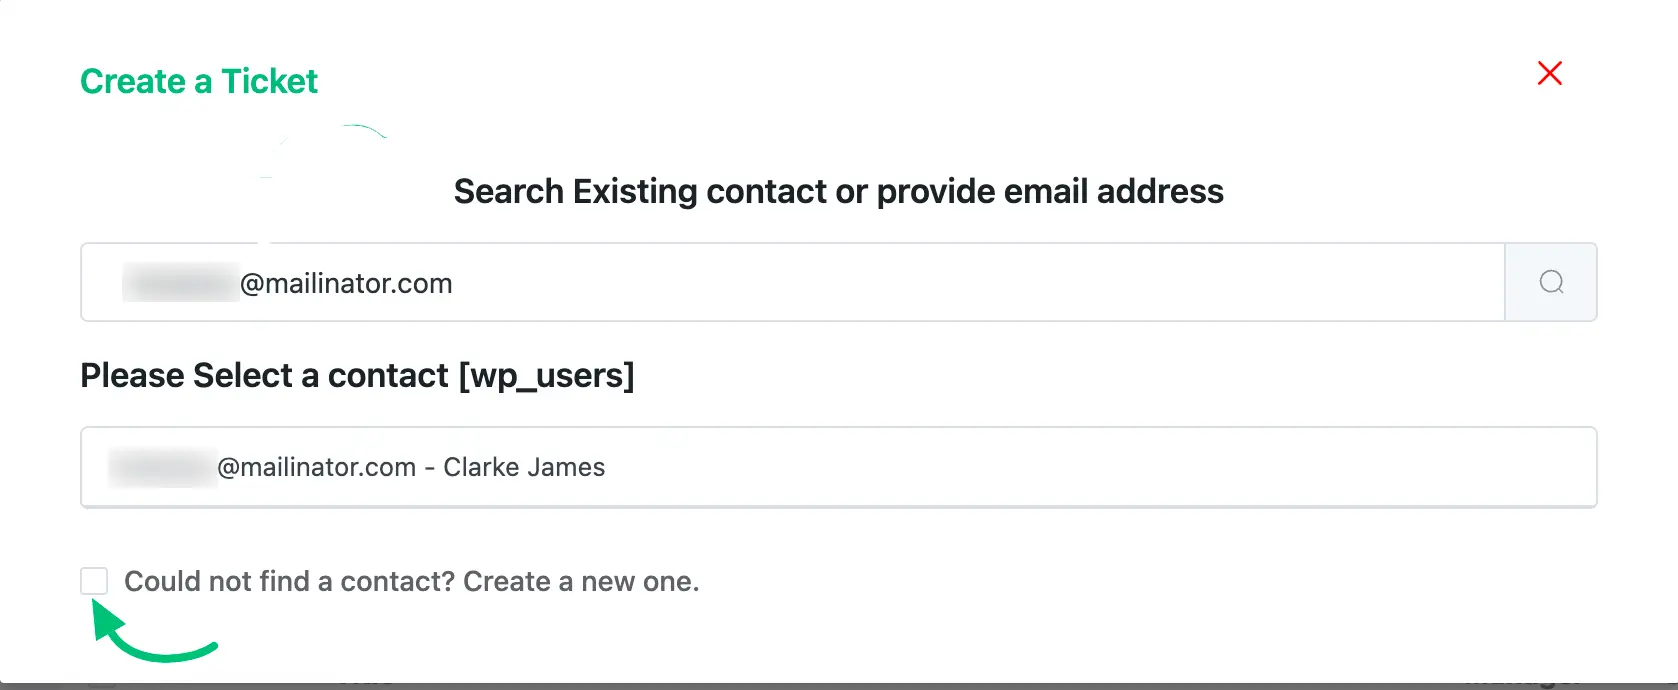 Could not find a contact? Create a new one checkbox